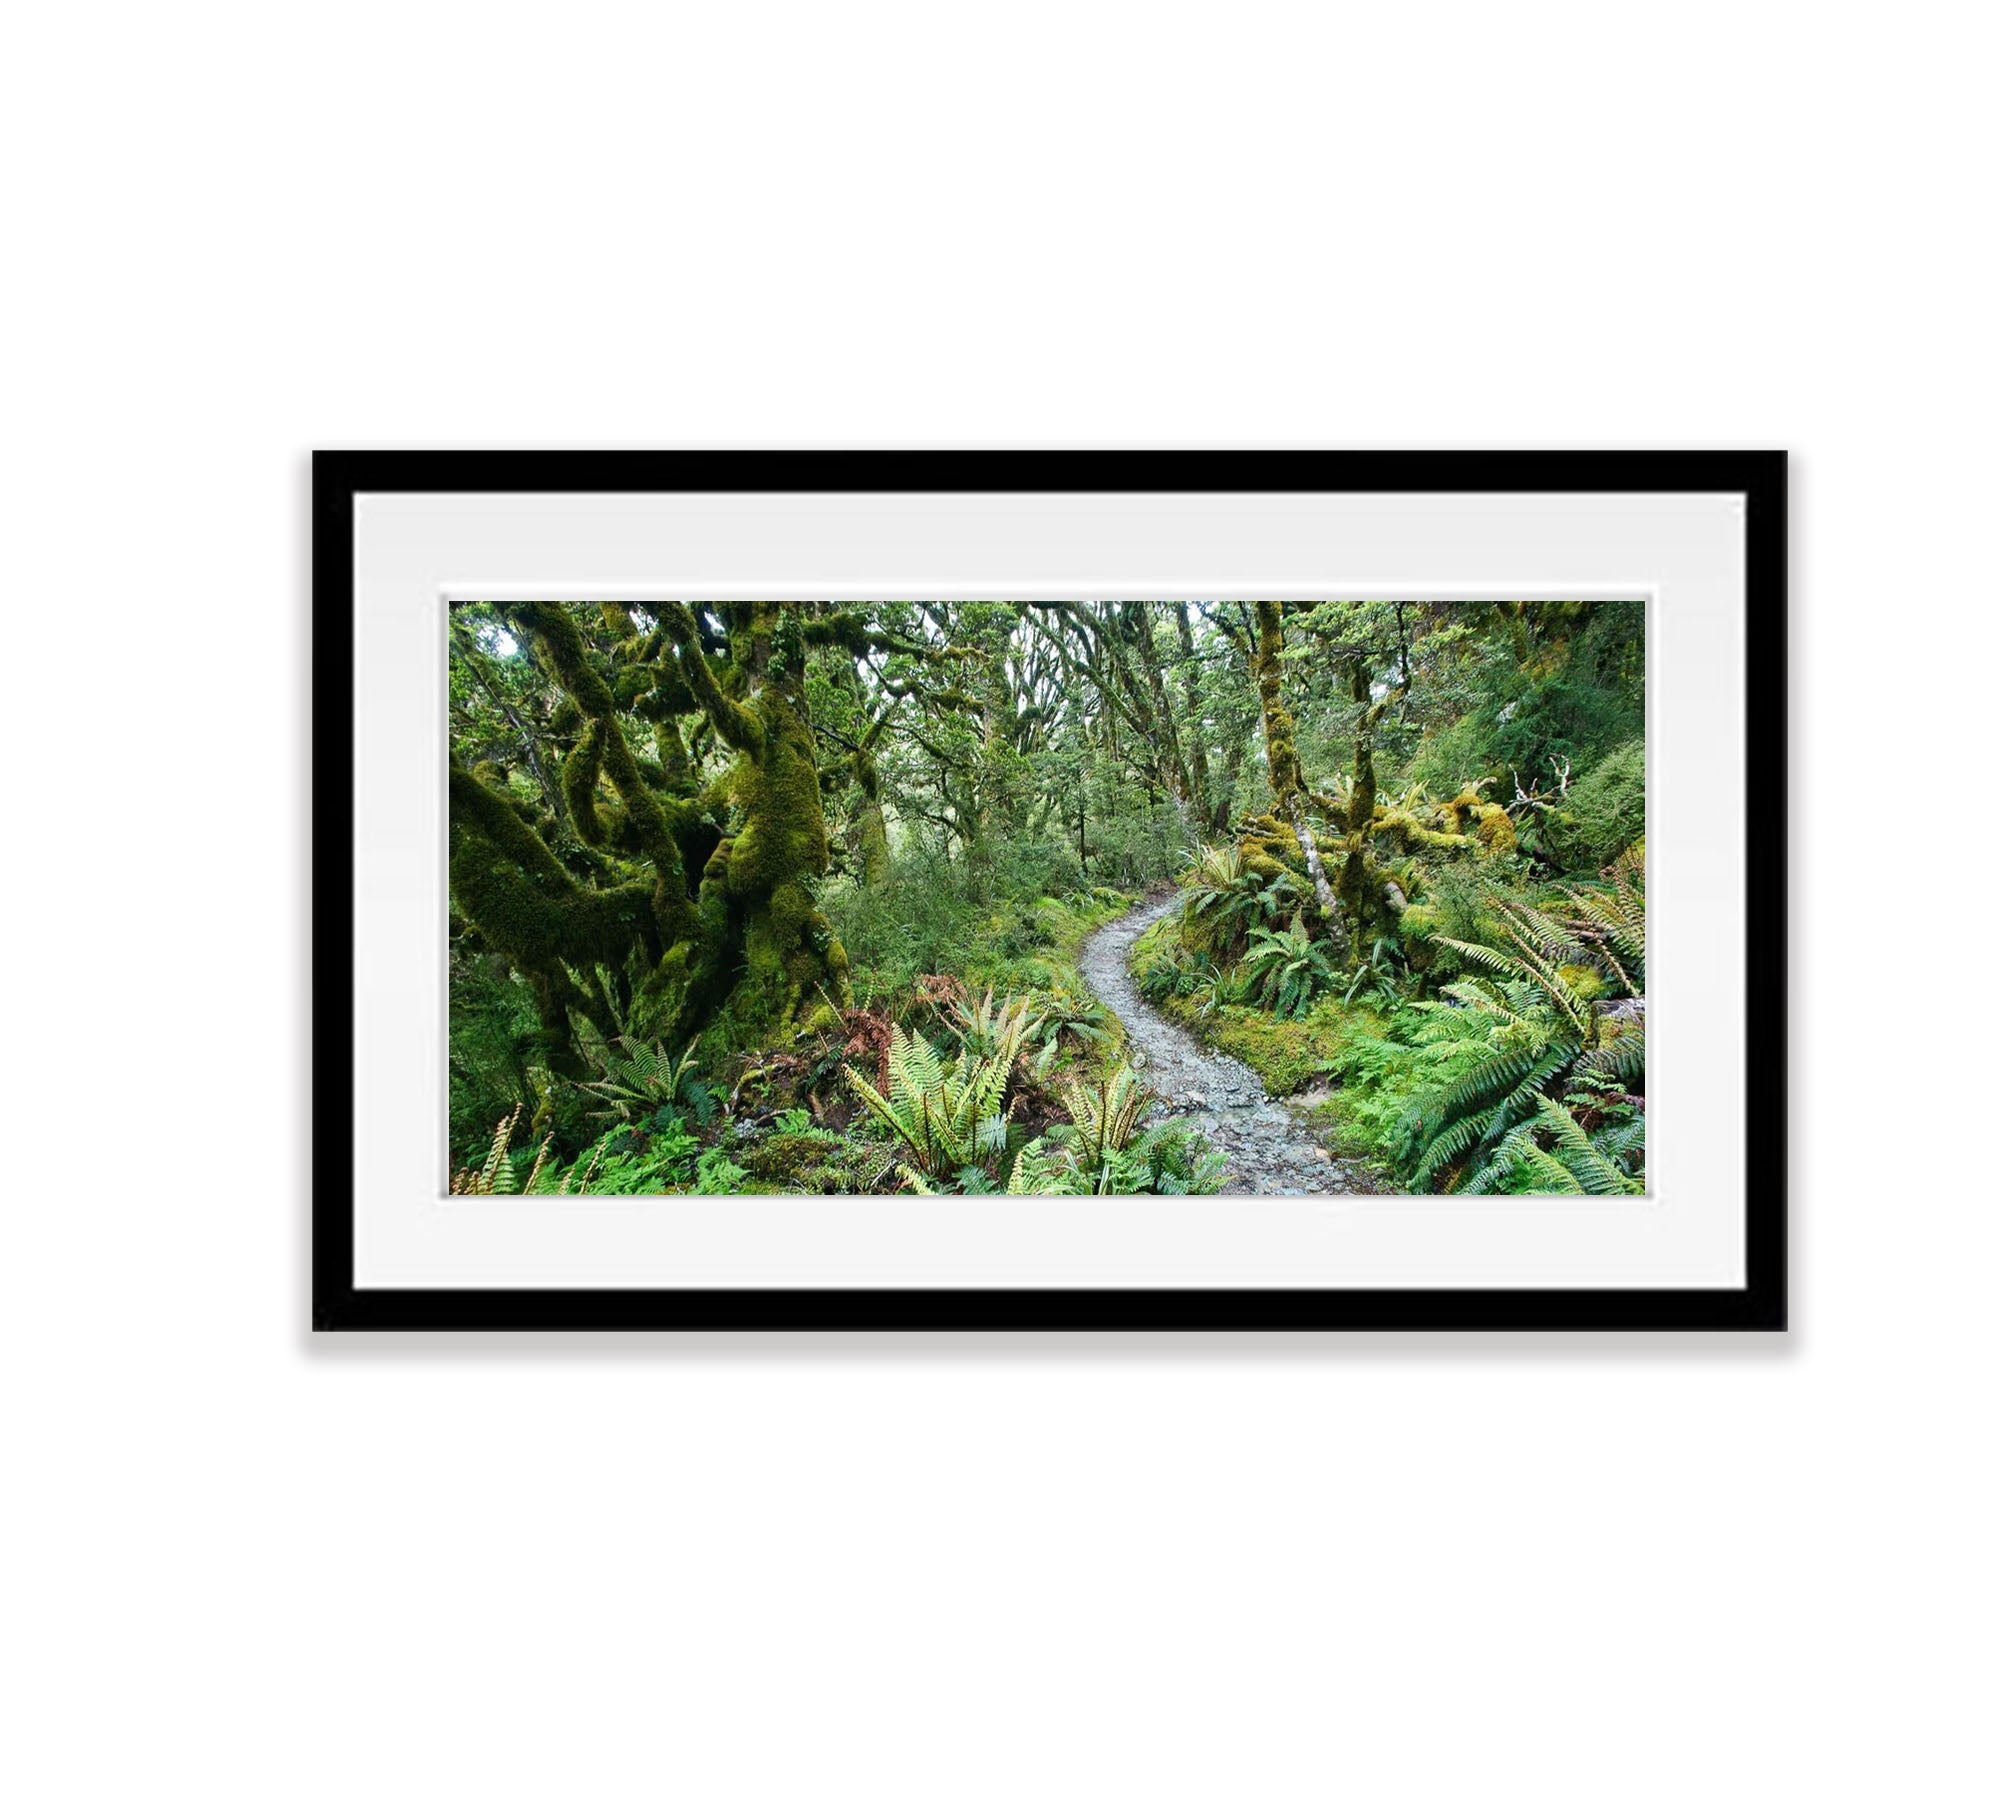 The Routeburn Track winding its way through rainforest - New Zealand